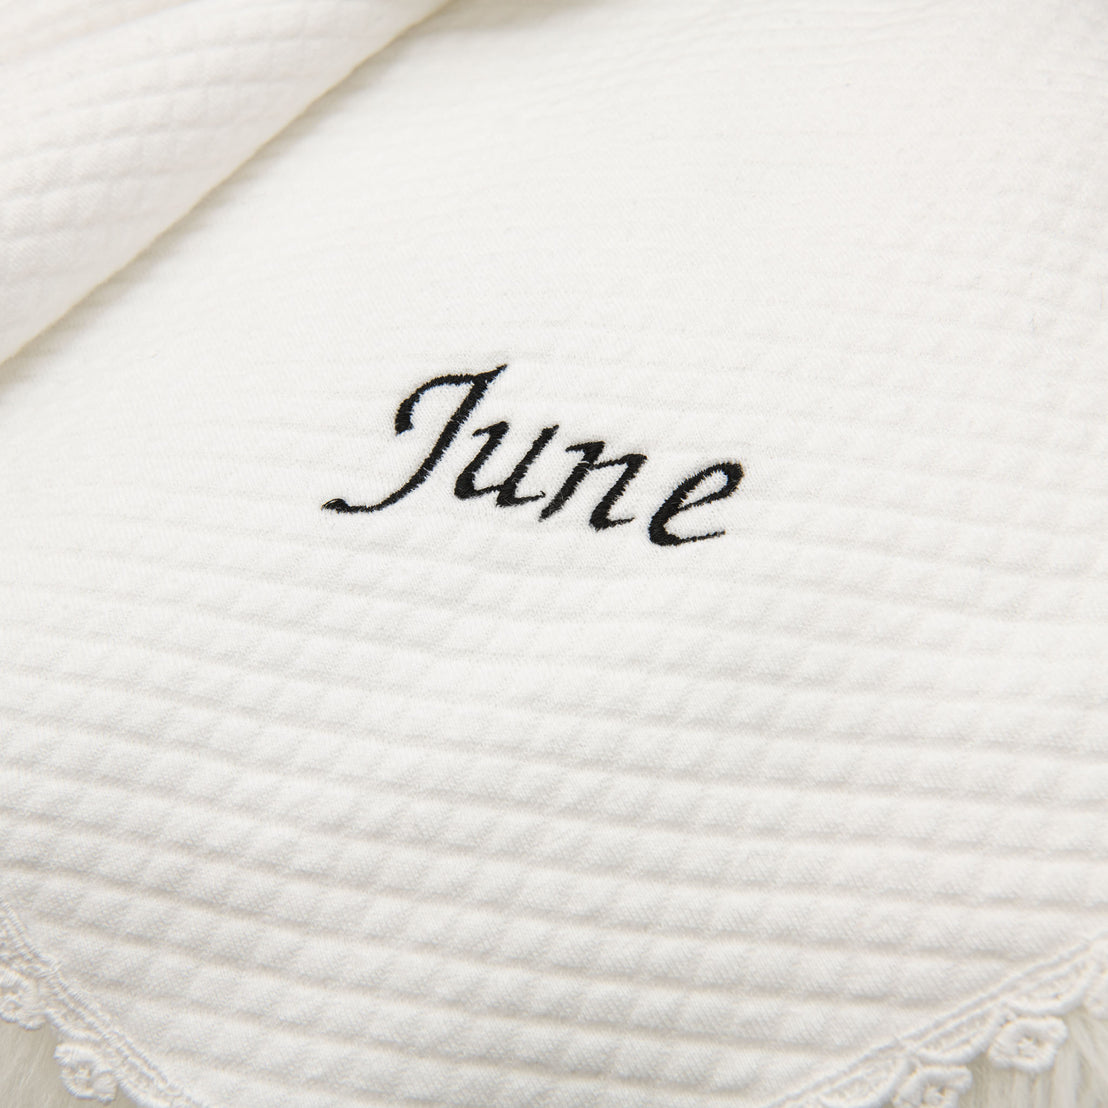 Close-up of a stylish white textured fabric with the name "June Personalized Blanket" embroidered in black cursive script.